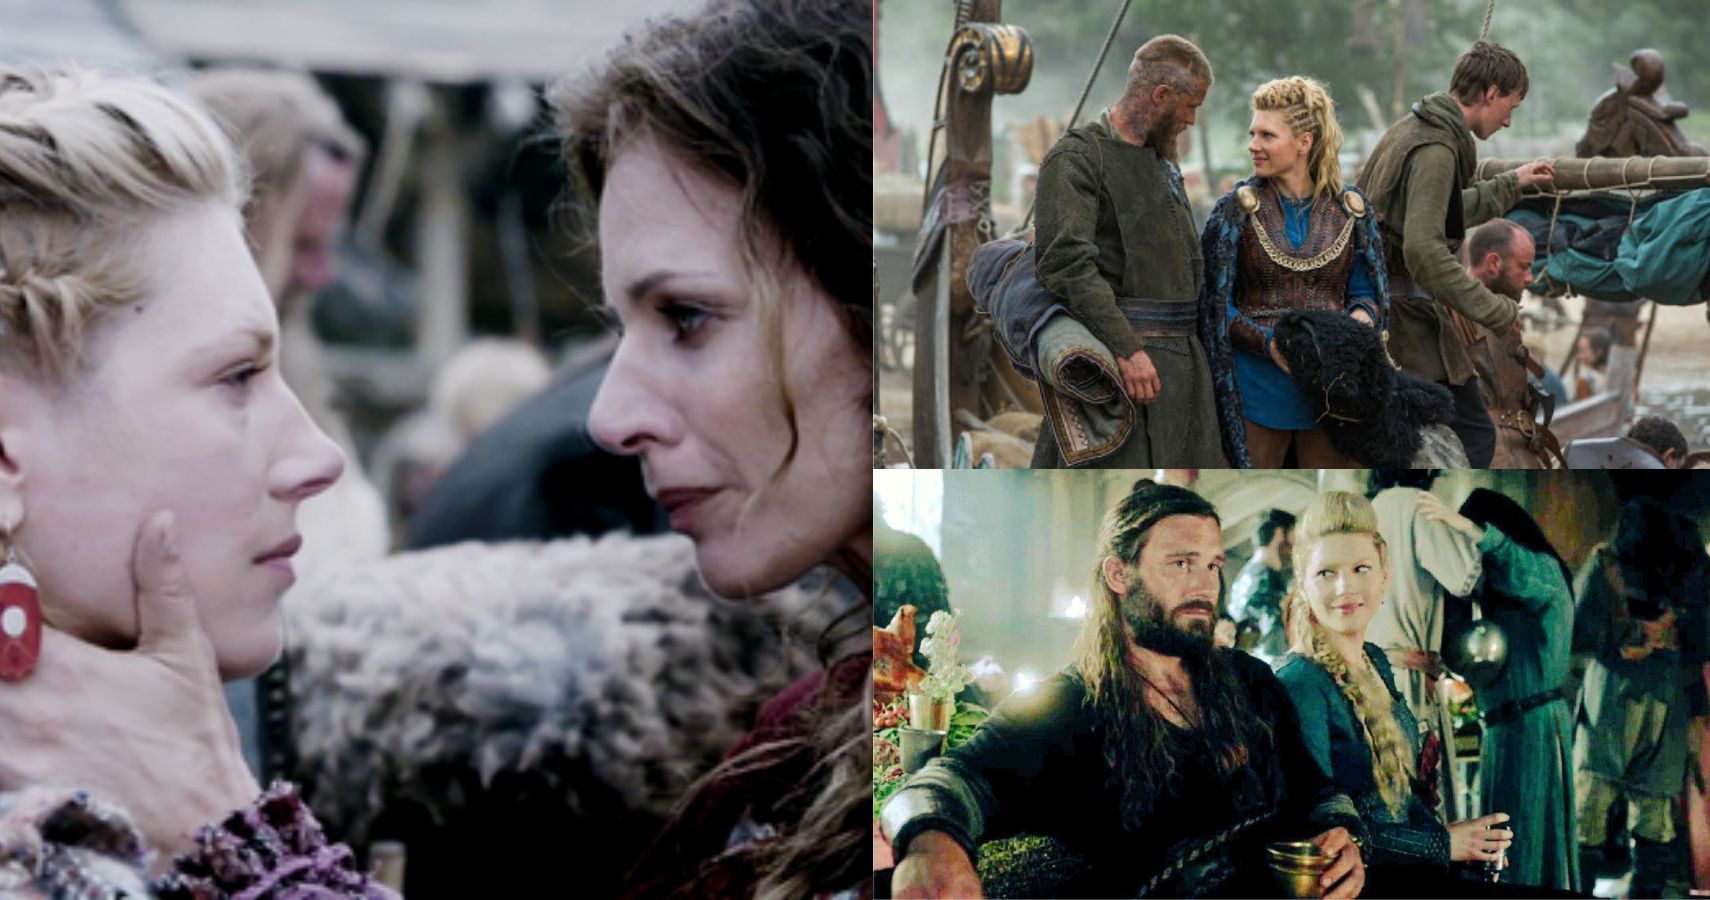 Vikings 5 Ways Lagertha And Ragnar Were Perfect (& 5 Others She Could Have Been With)